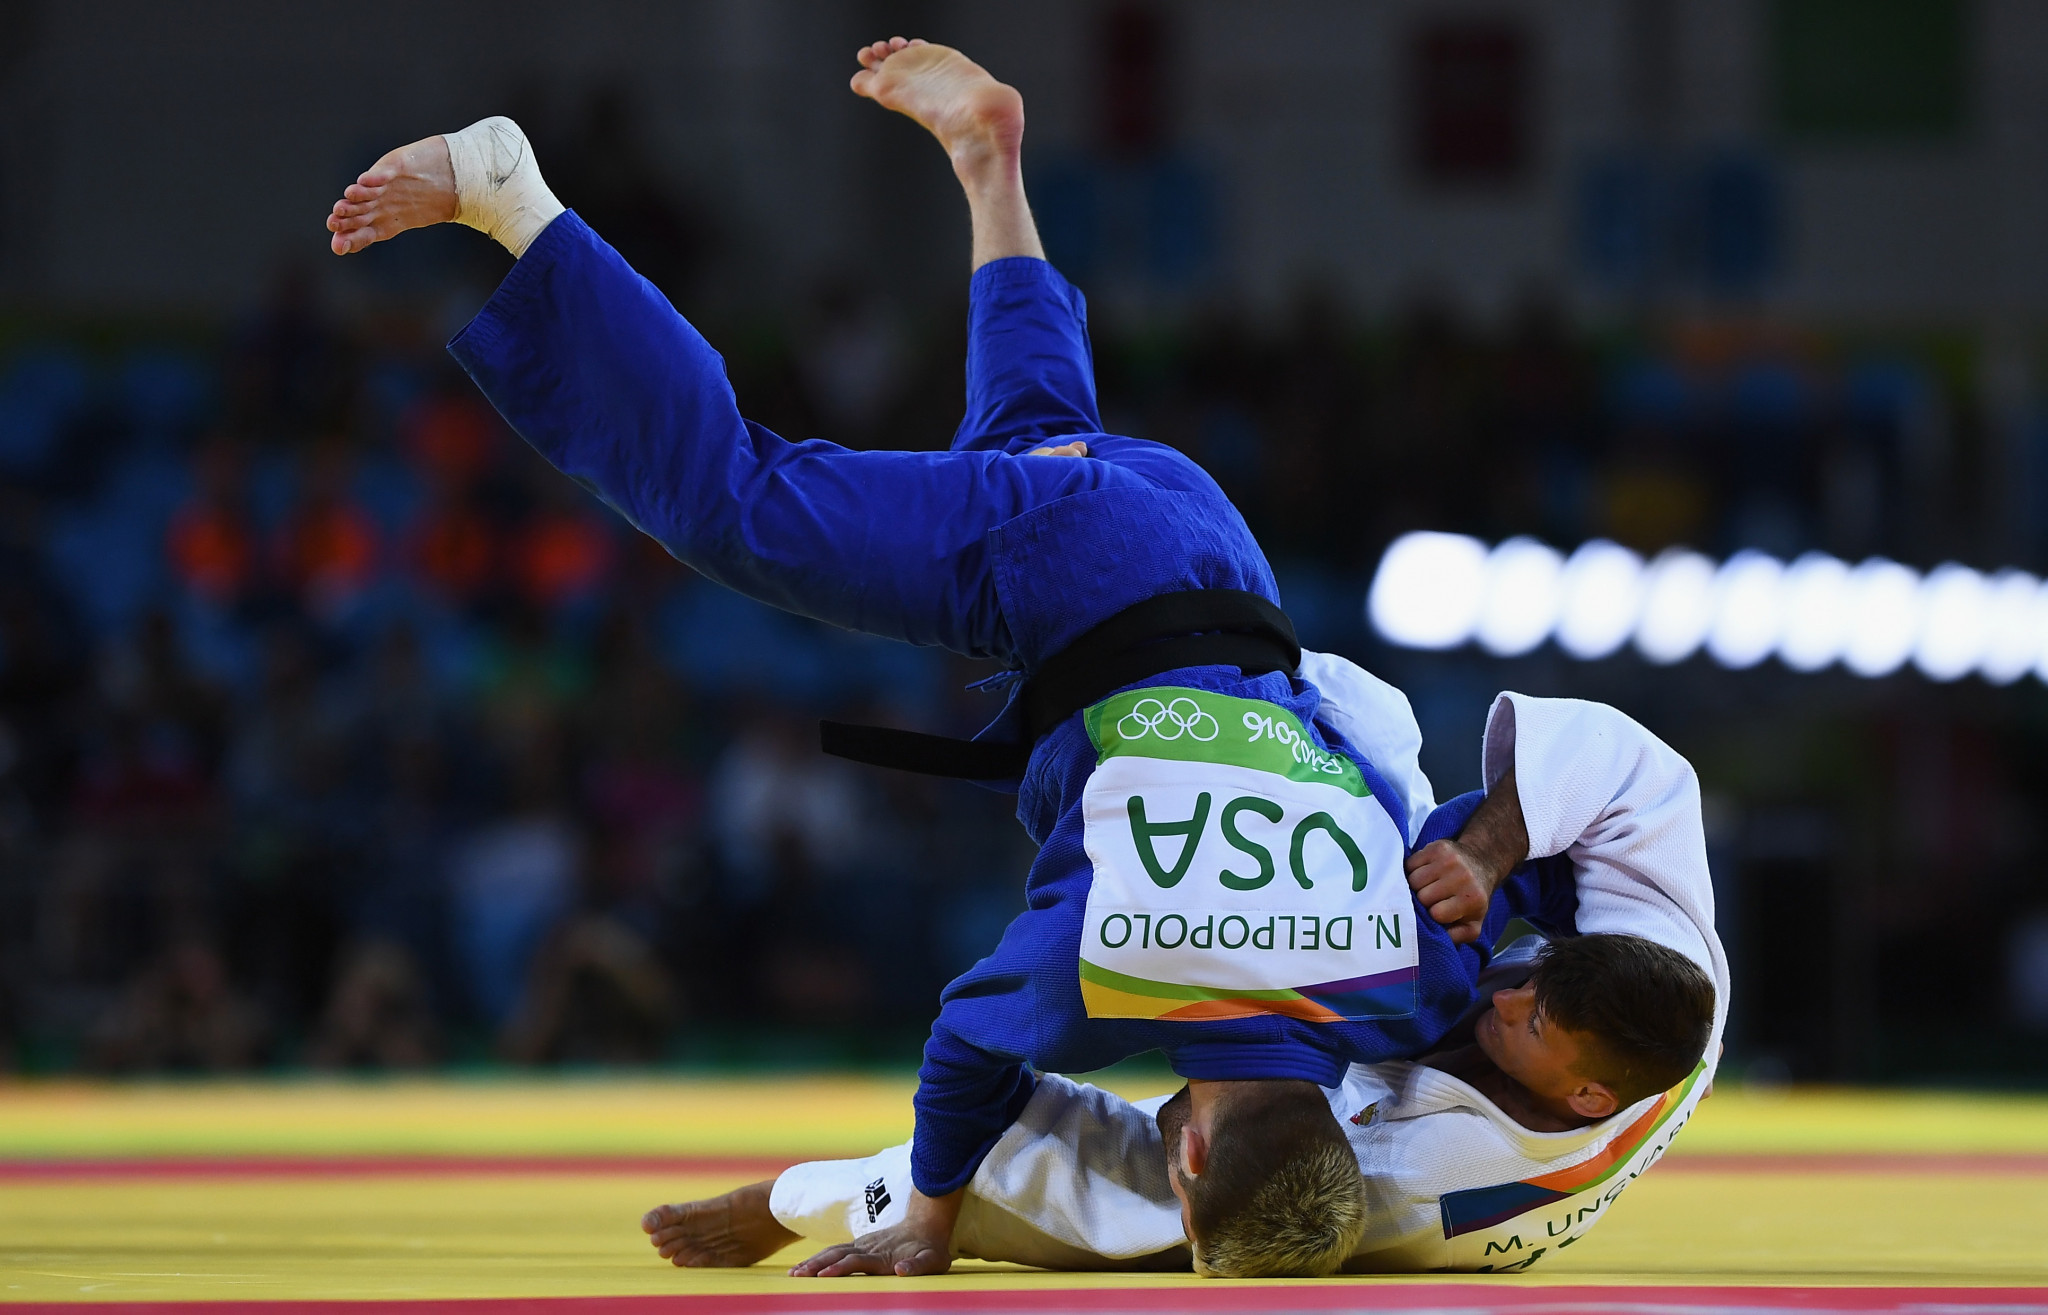 The best in American judo will take part in Daytona Beach ©Getty Images